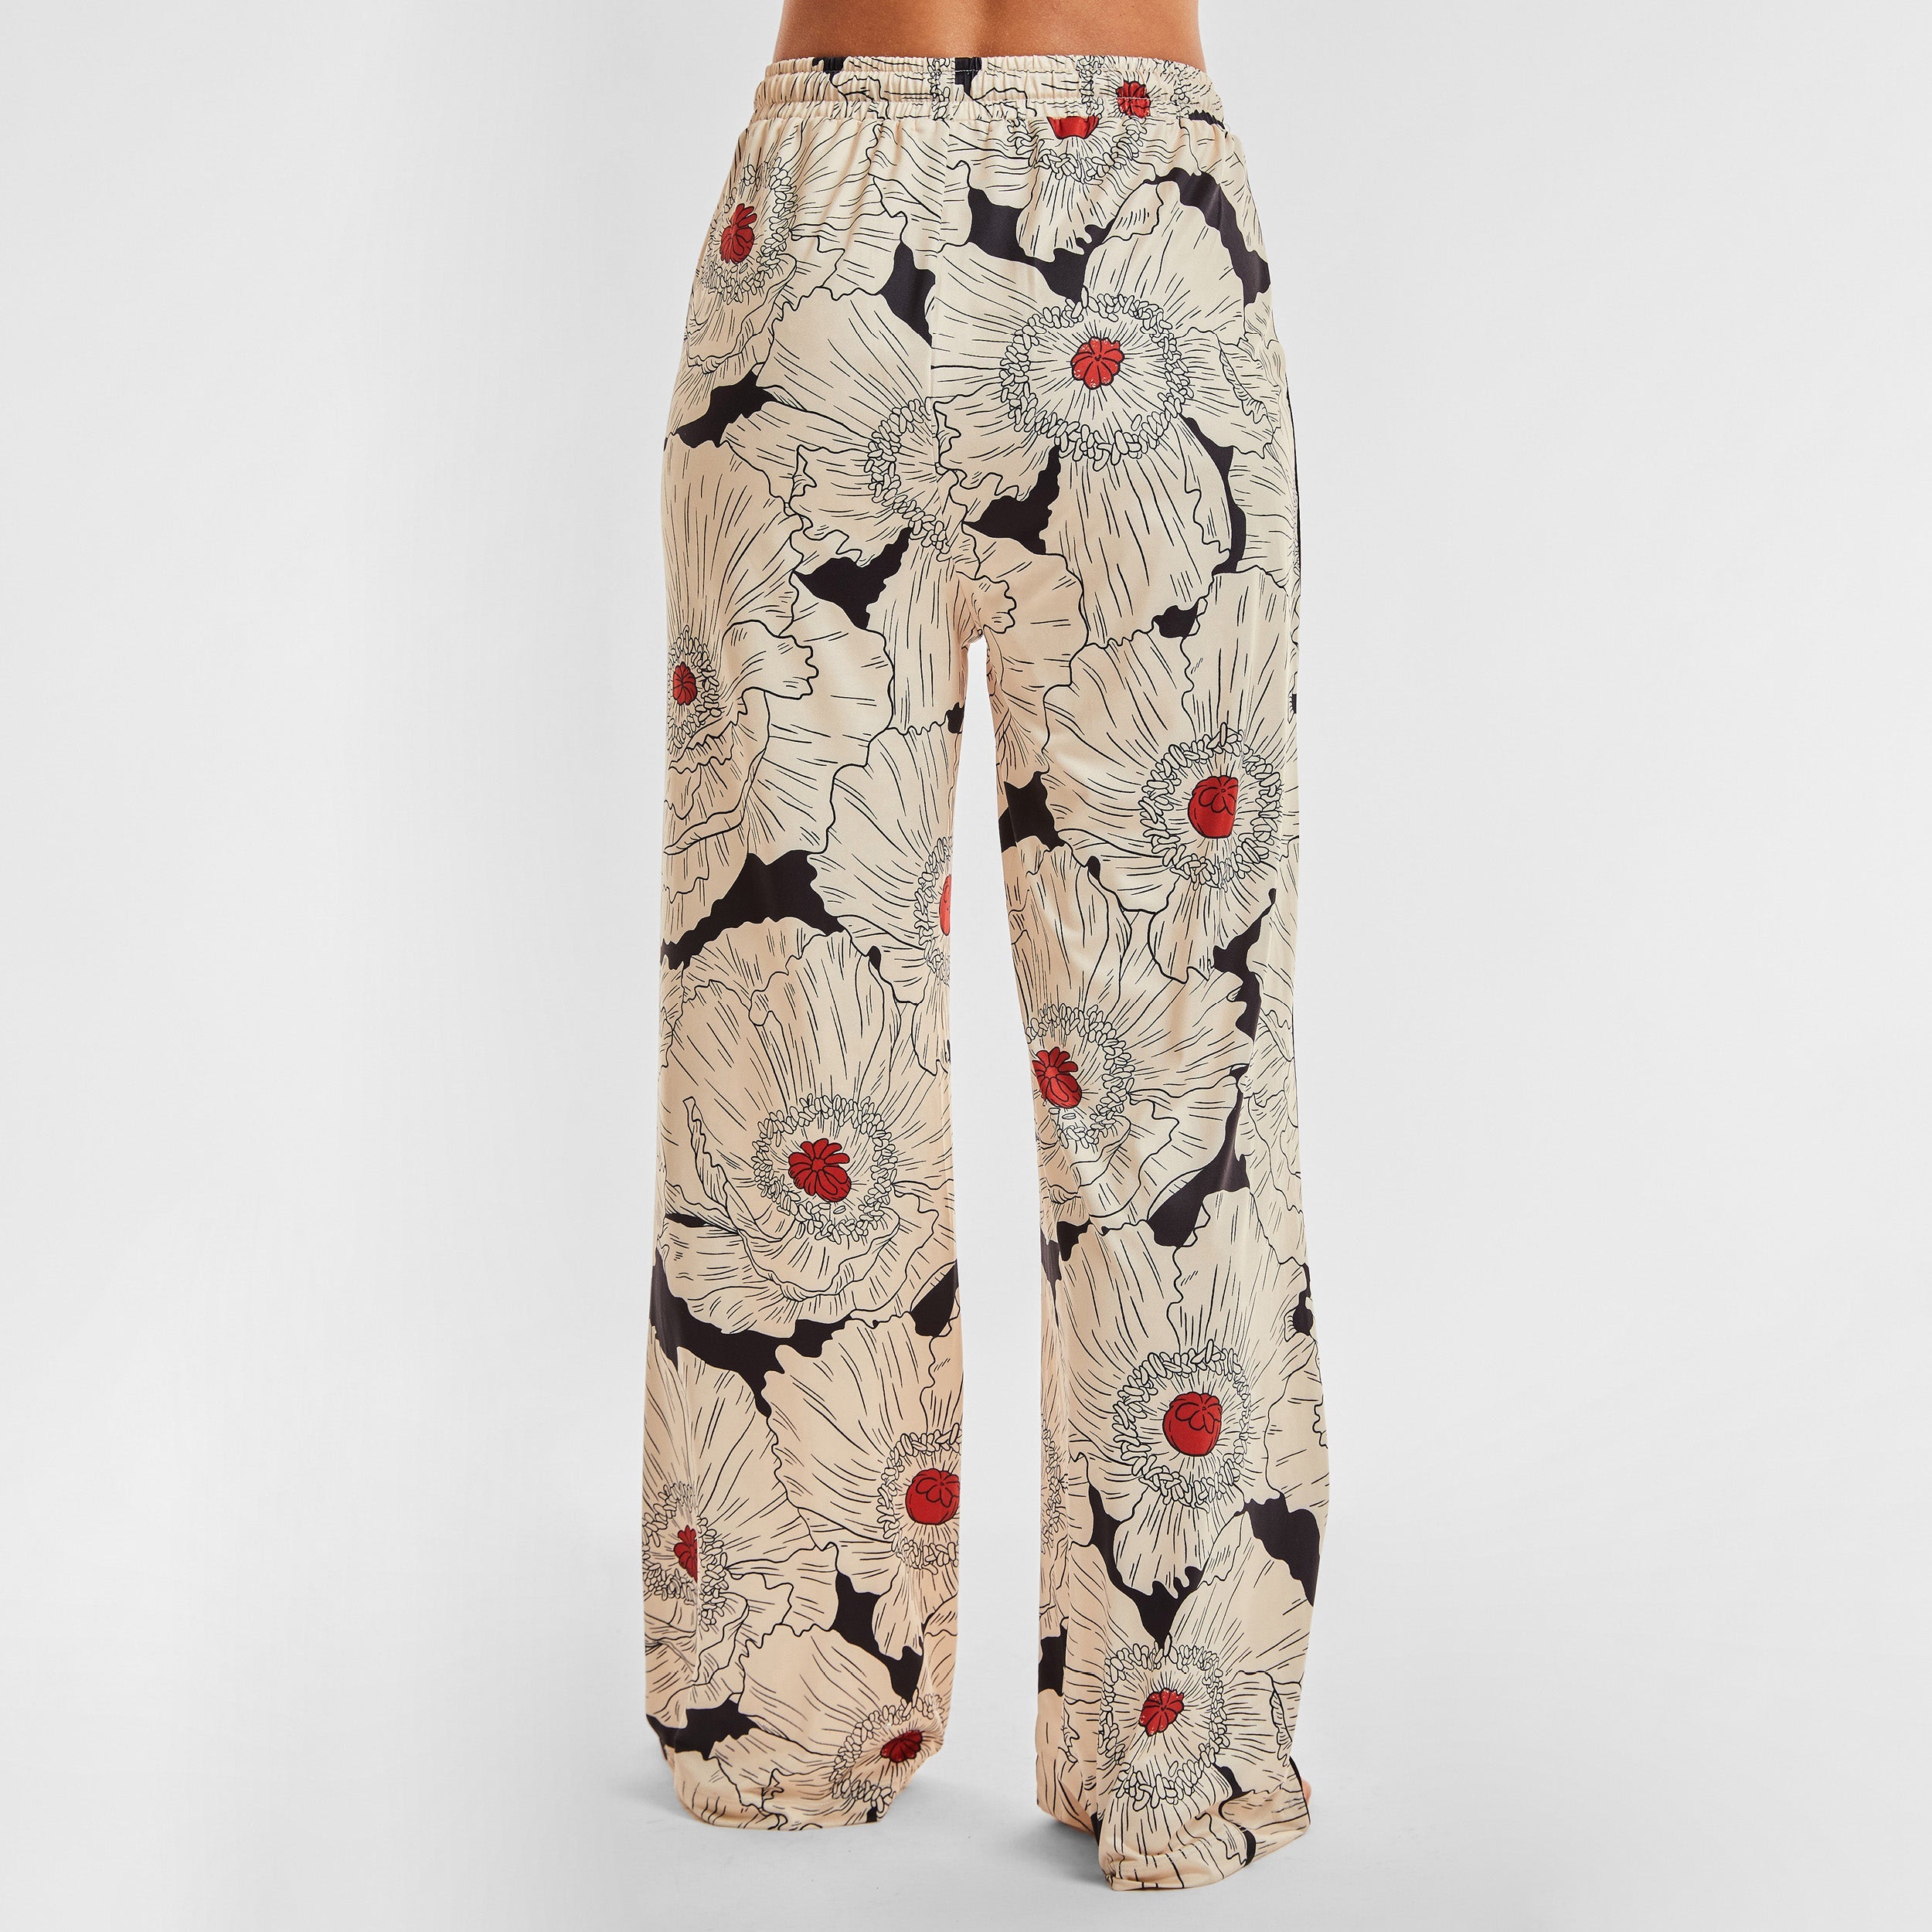 Rear view of woman wearing breathable, relaxed and buttery smooth pajama pant featuring high-waist cut, side pockets, front tie and stunning Poppy floral print.